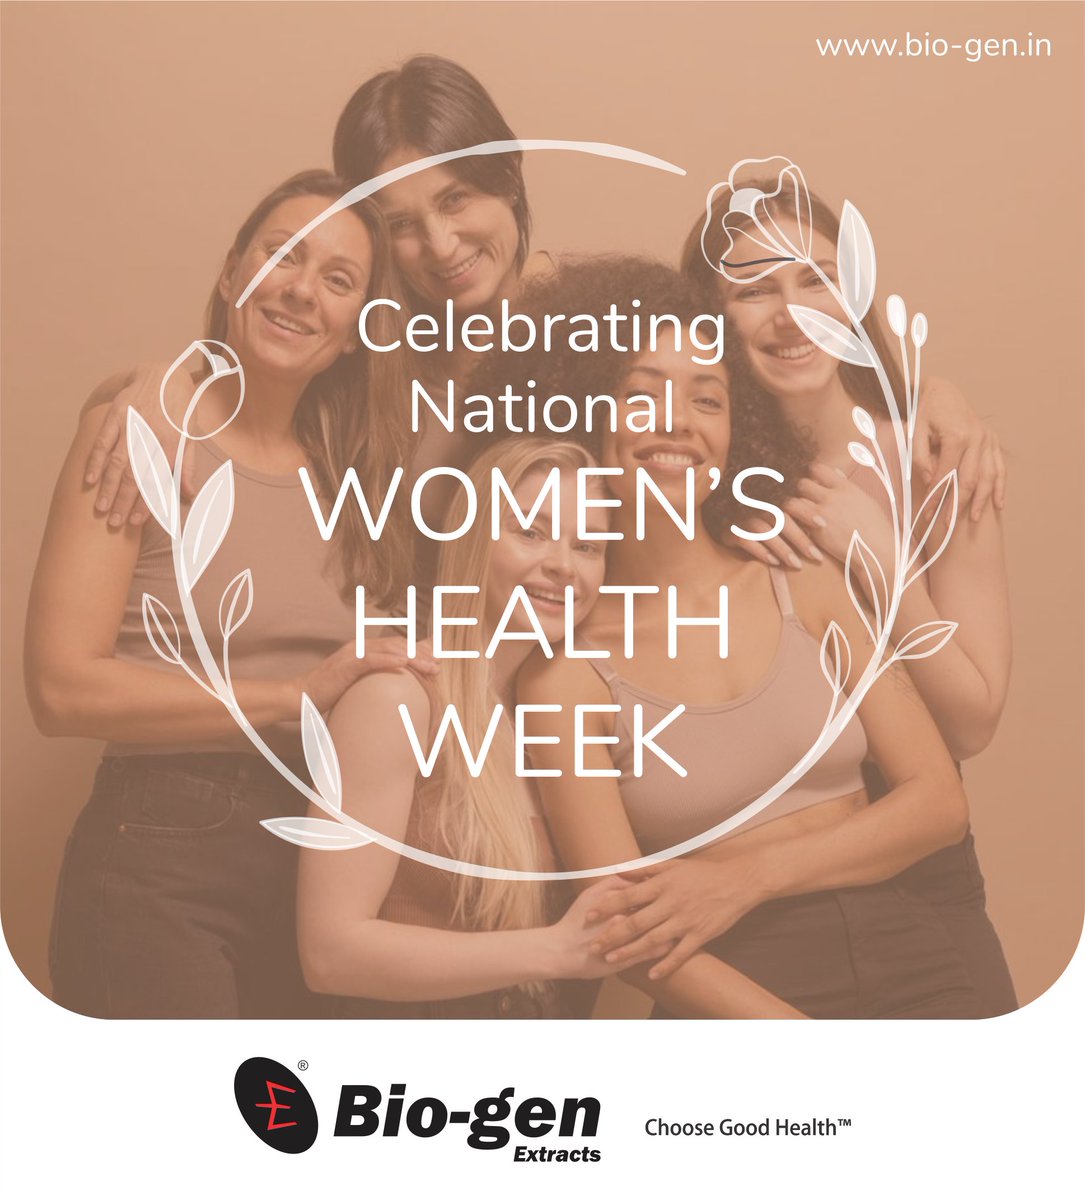 Celebrating National Women’s Health Week!

Let us champion women’s wellness at every life stage, empowering them to prioritize choices that nurture their overall well-being. Let’s shine a light on women’s health not just this week, but every single day.

#nationalwomenshealthweek